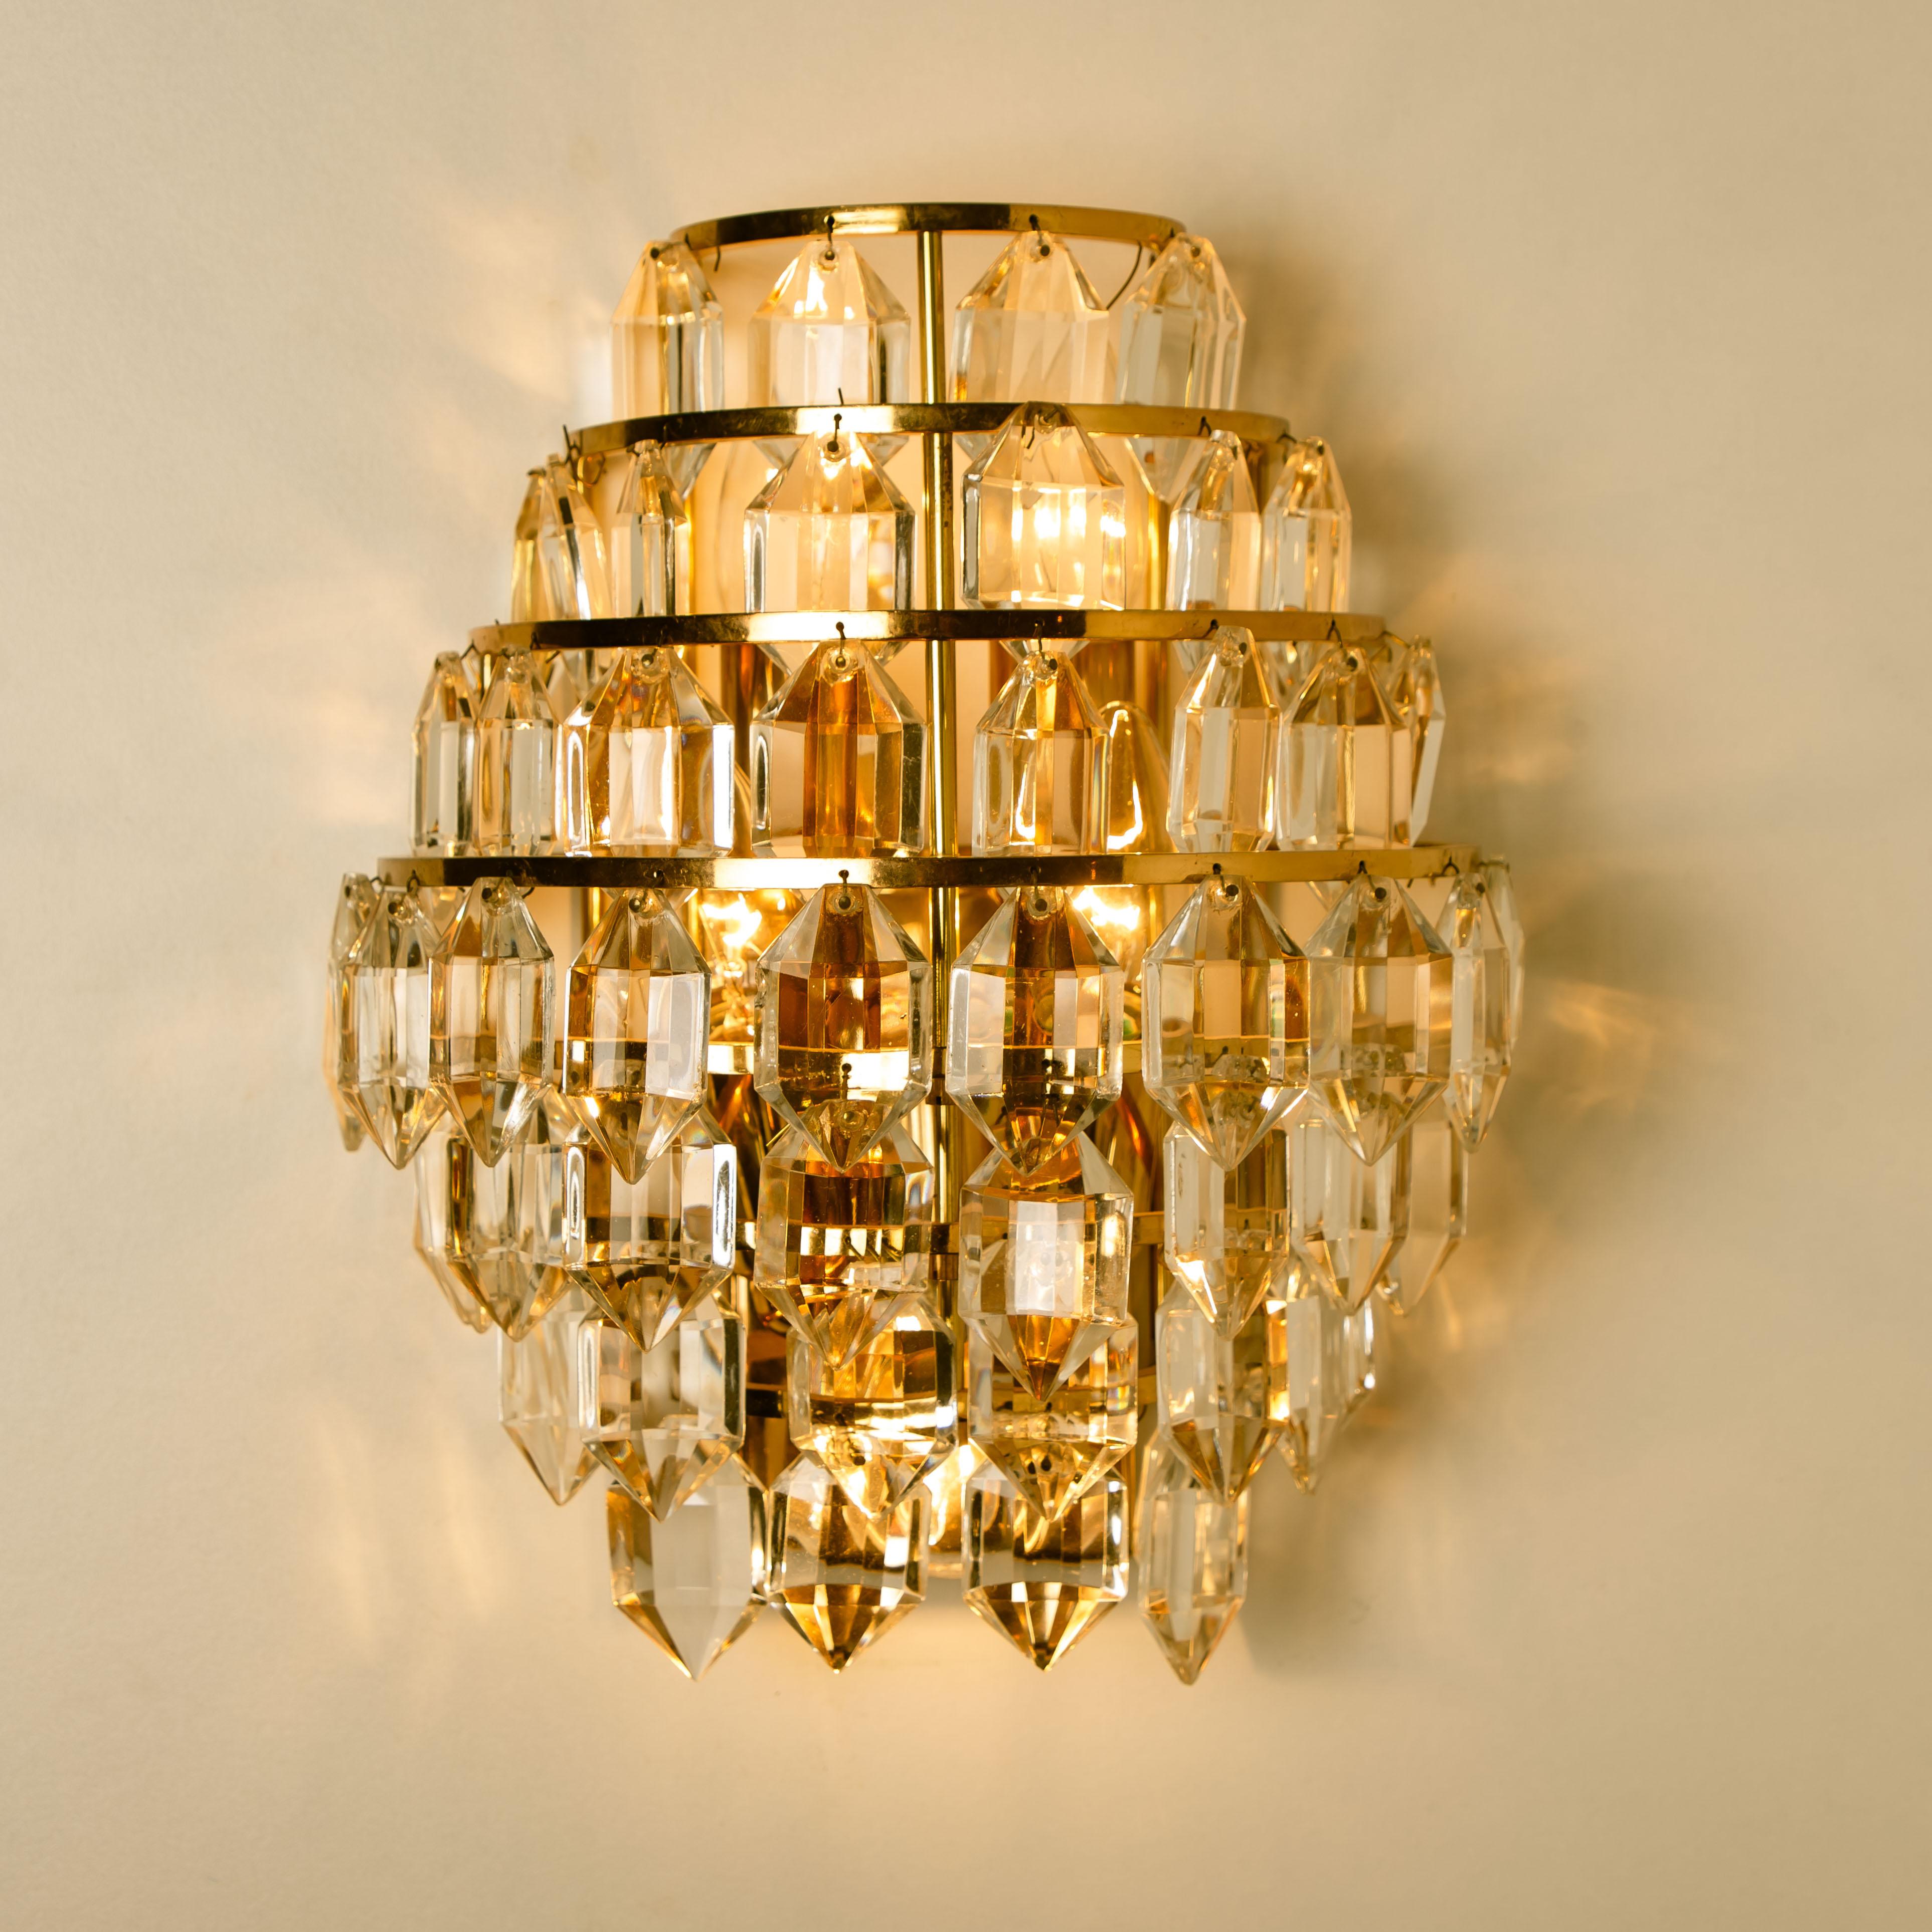 One of the Four Modern Crystal Glass Wall Sconces by Bakalowits, 1960s For Sale 5